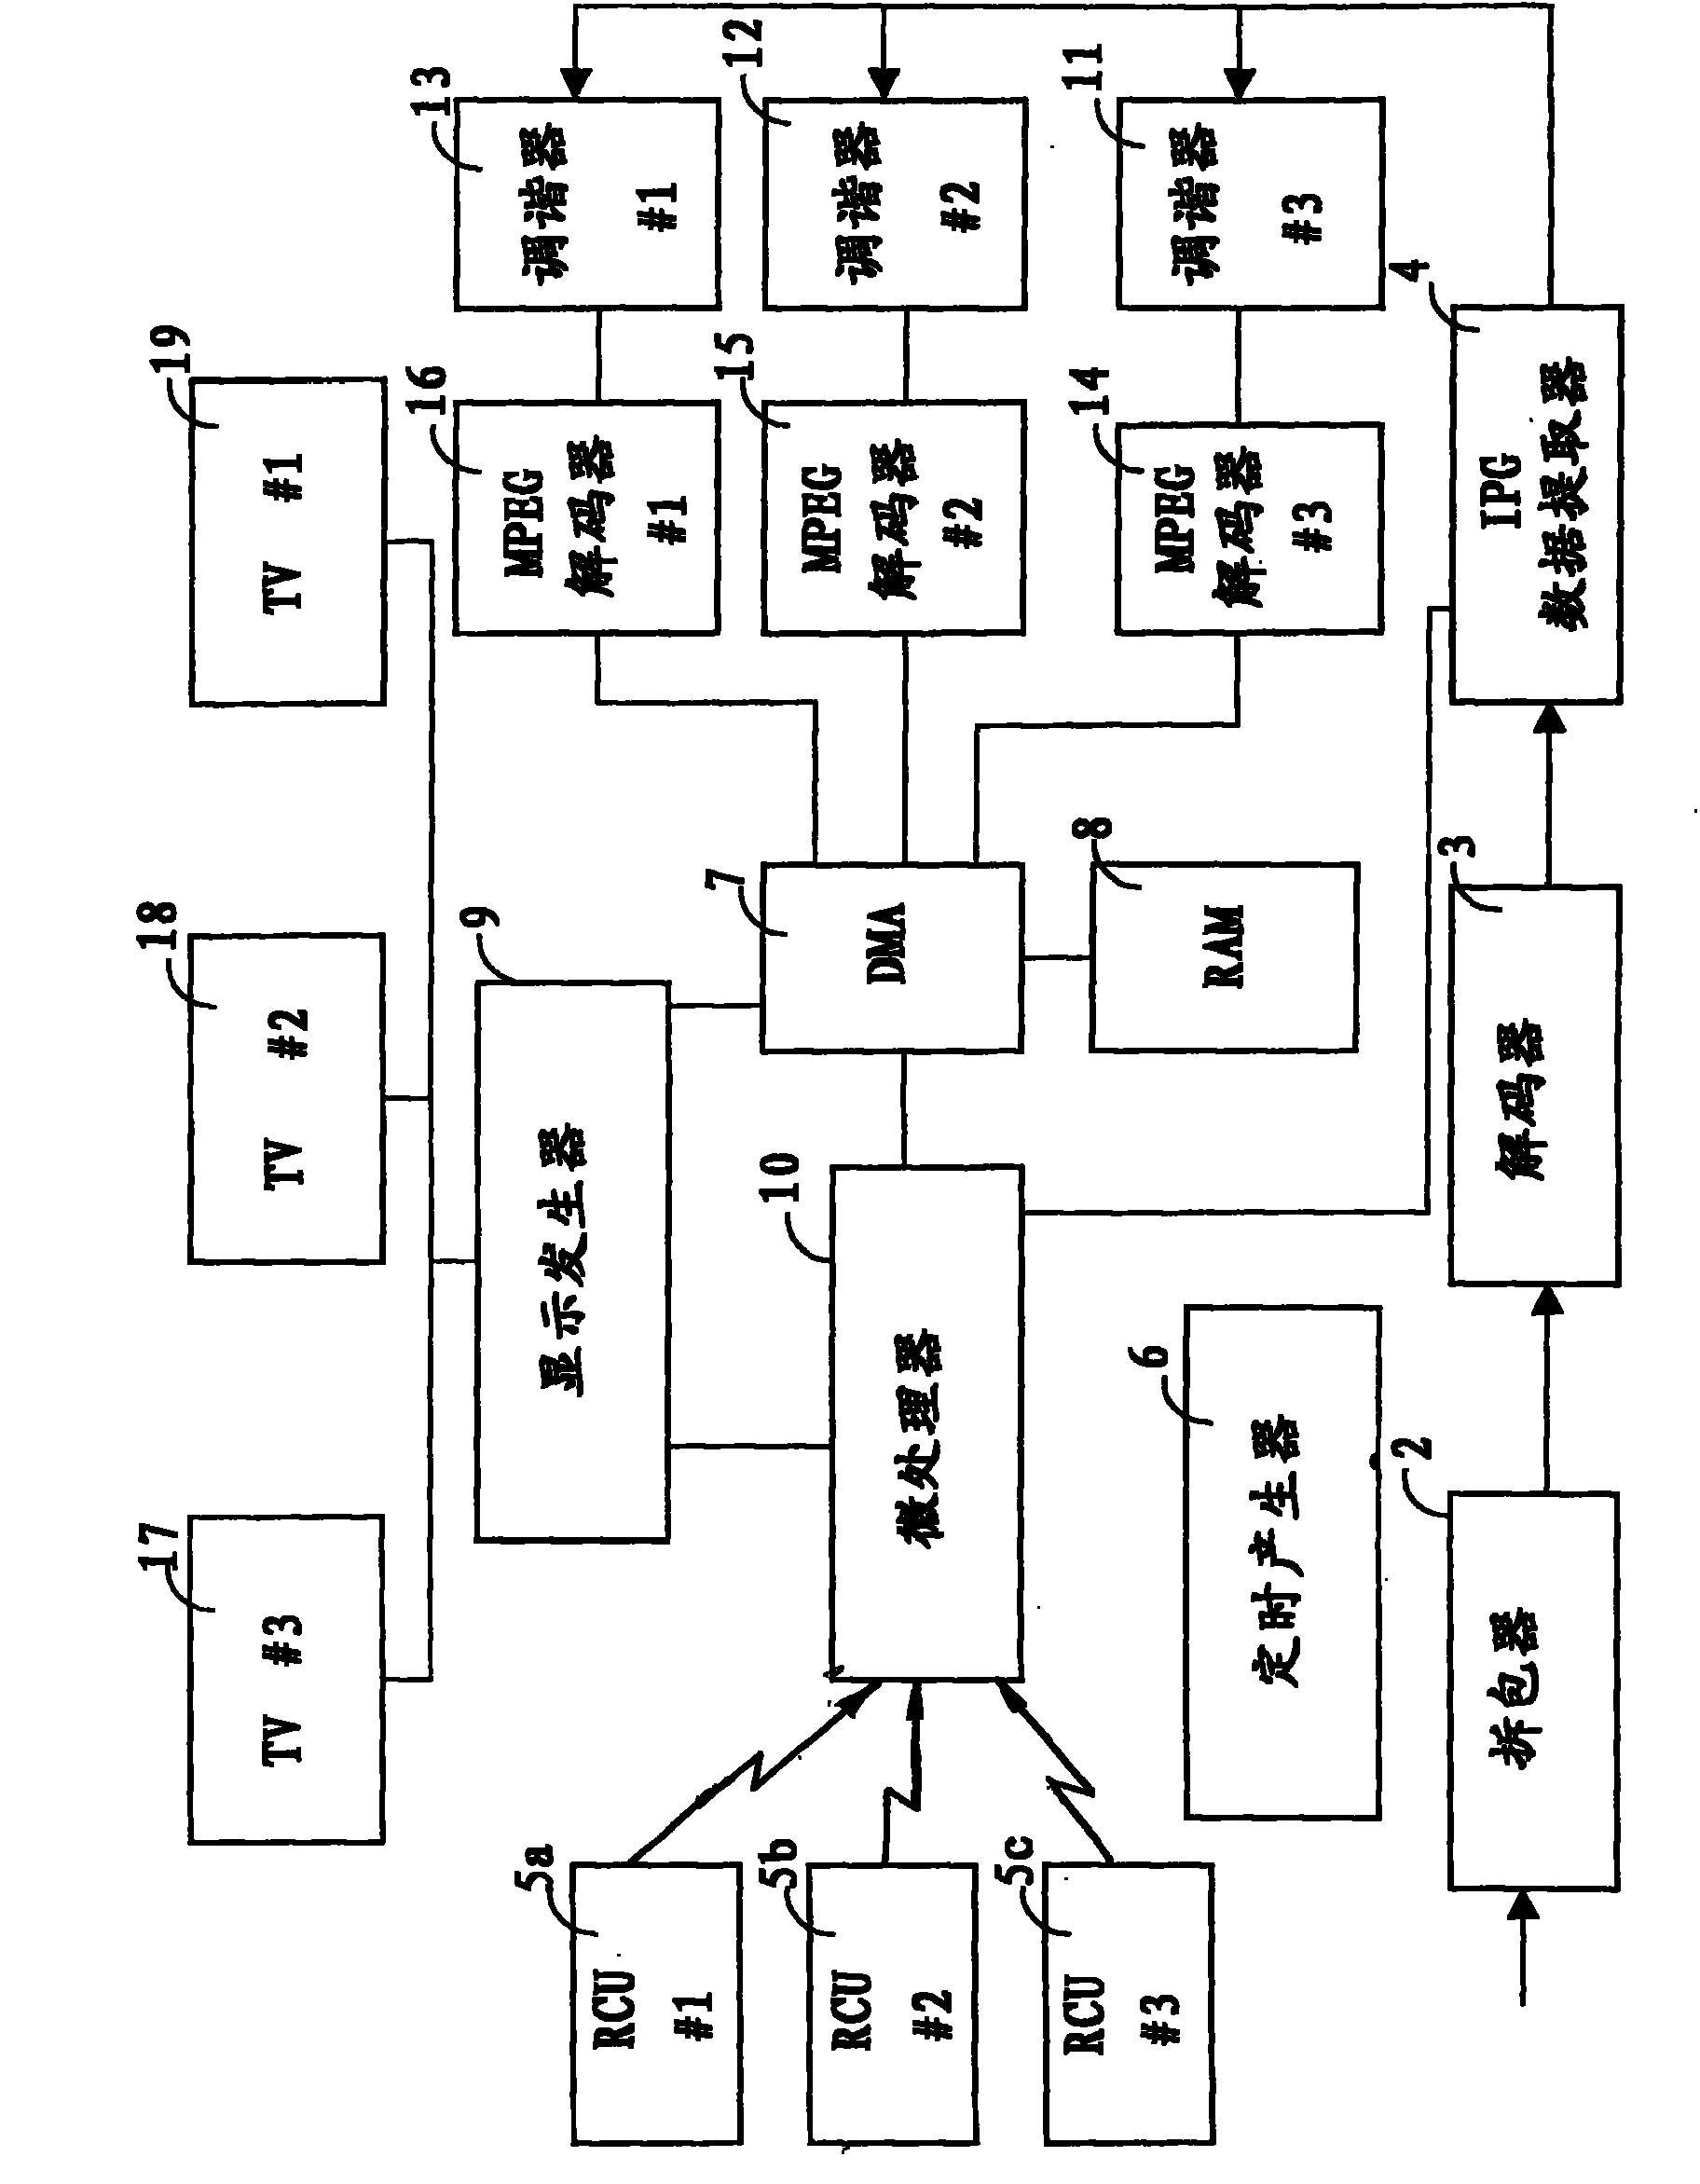 Systems and methods for multiple interactive electronic program guides